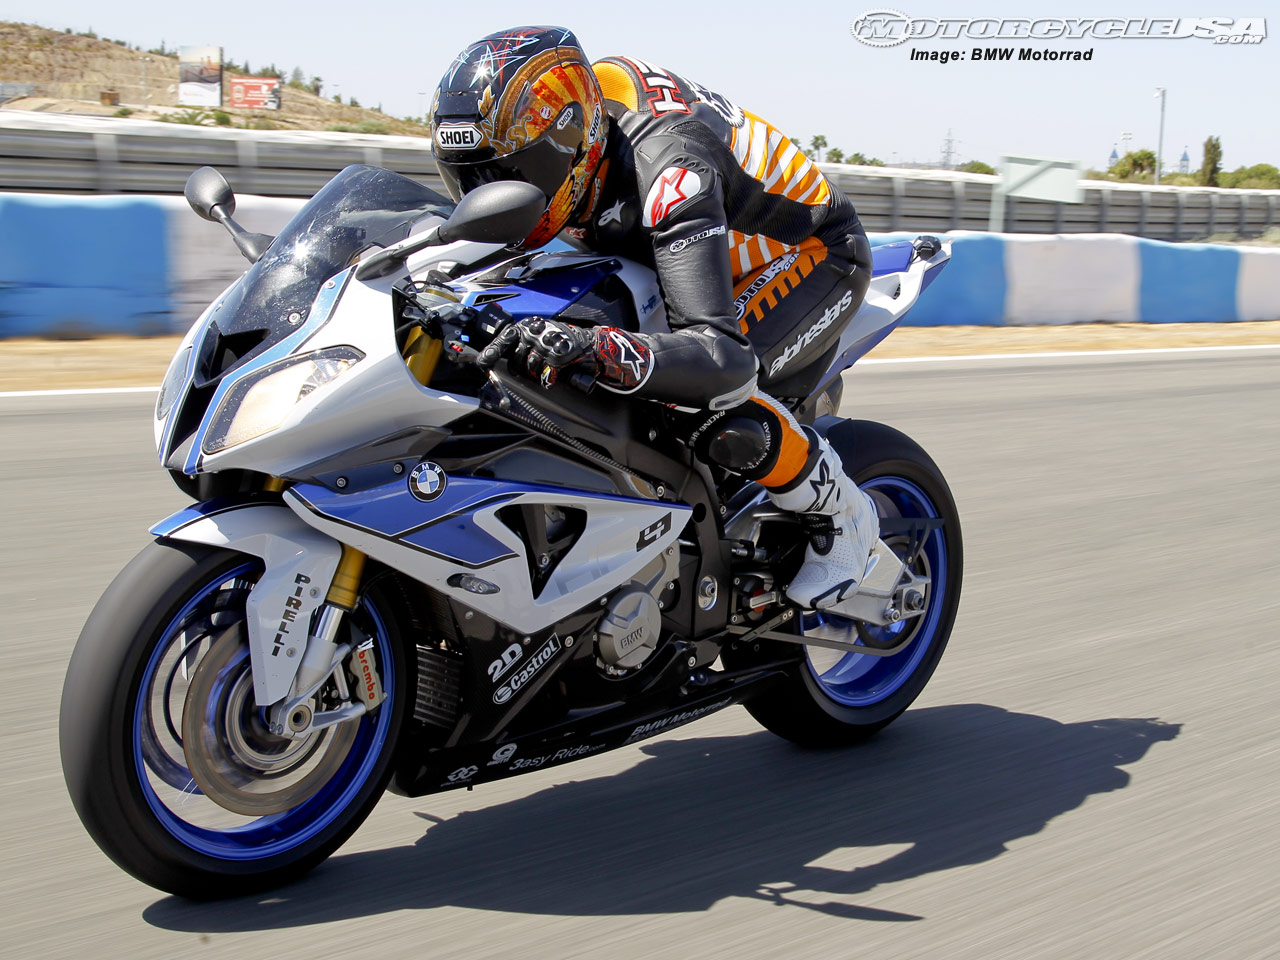 2014 Bmw S1000rr Hp4 Specs And Price 2013 2014 Autos Post